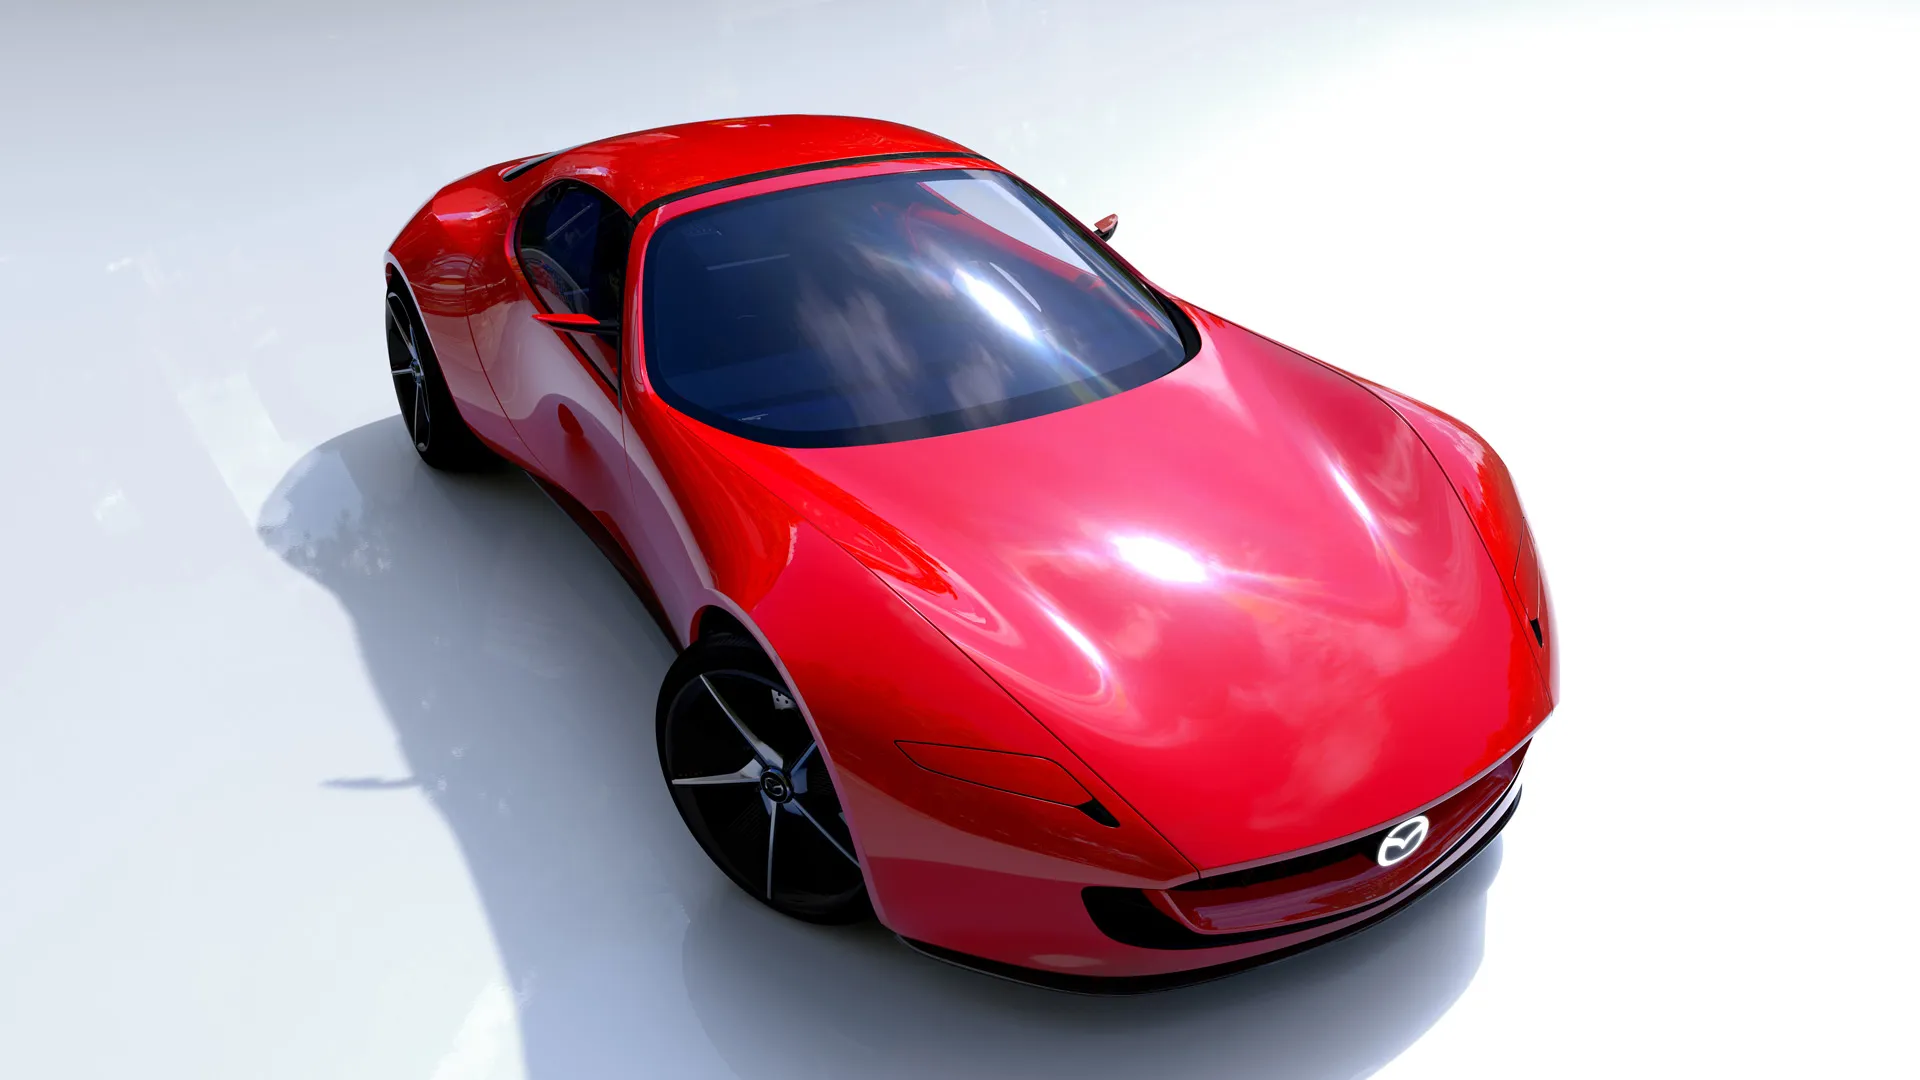 Mazda Iconic SP hybrid sports car concept electrifies RX-7 heritage